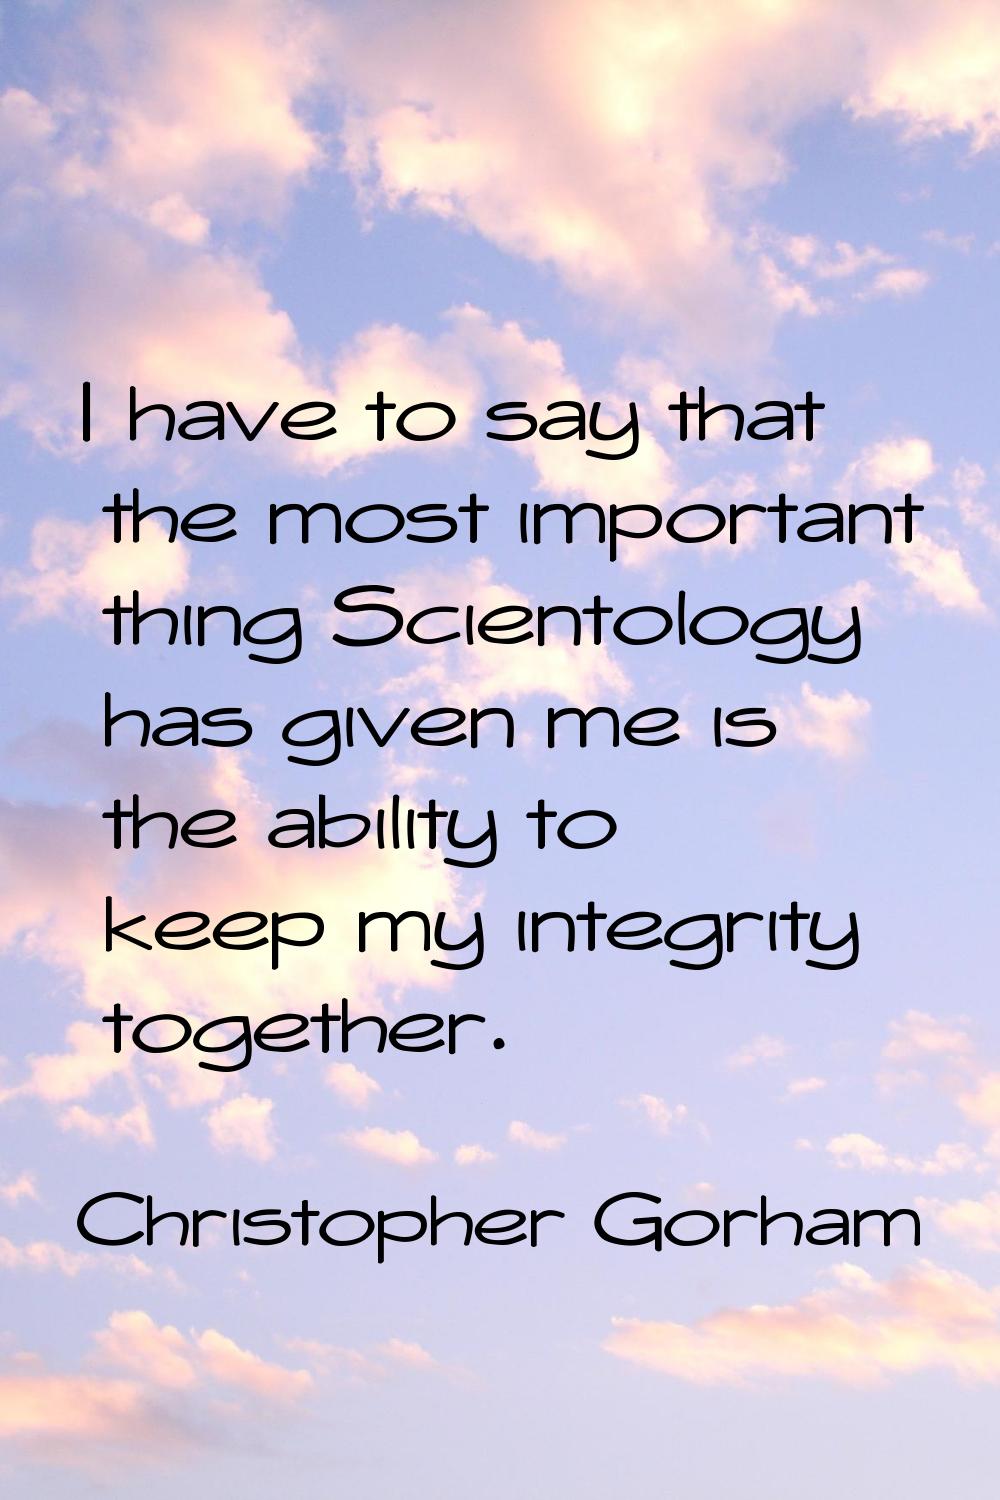 I have to say that the most important thing Scientology has given me is the ability to keep my inte